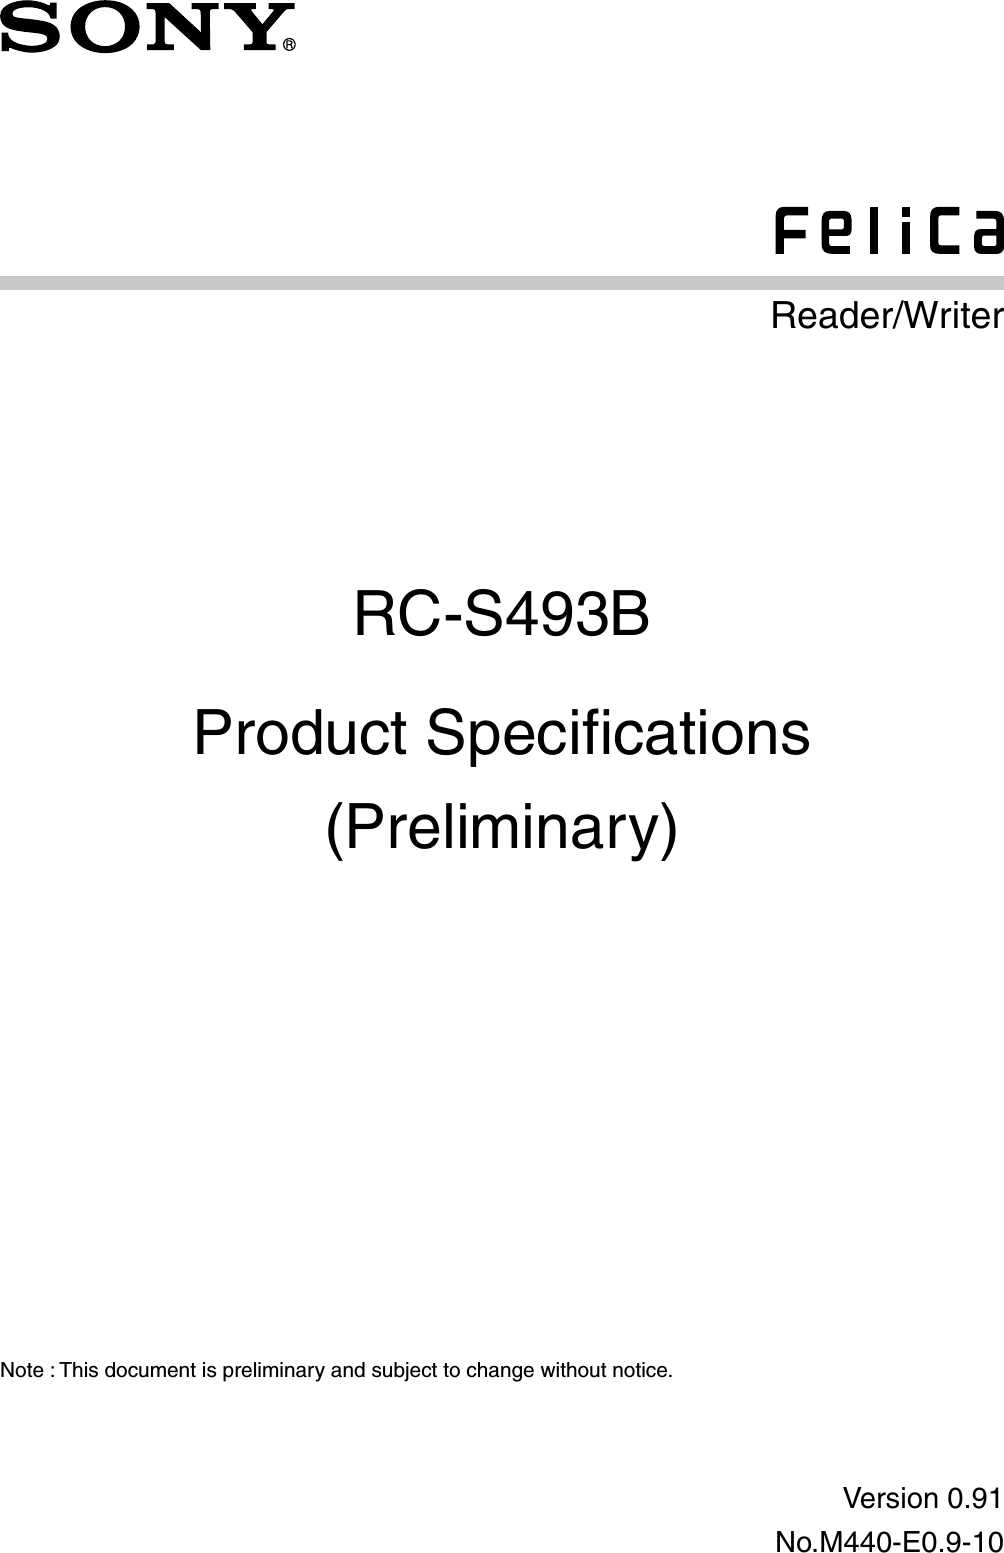 Version 0.91No.M440-E0.9-10Product Speciﬁcations(Preliminary)RC-S493BReader/WriterNote : This document is preliminary and subject to change without notice.